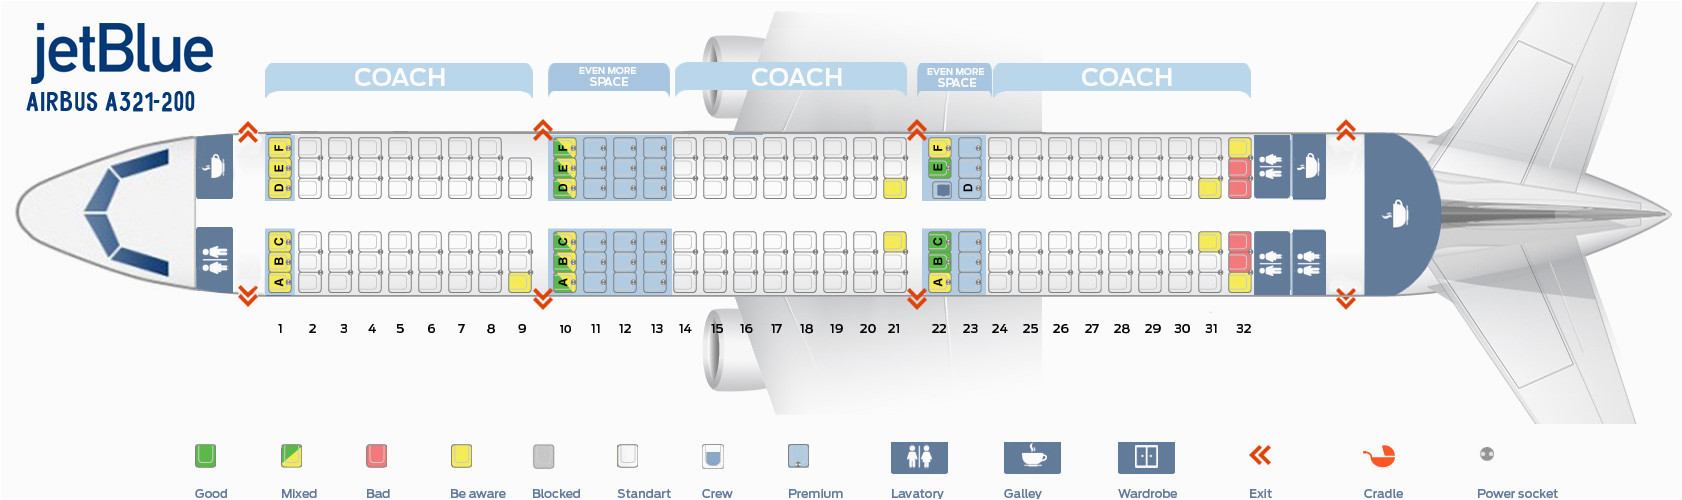 Air Canada 321 Seat Map 2019 A Chart Images Online